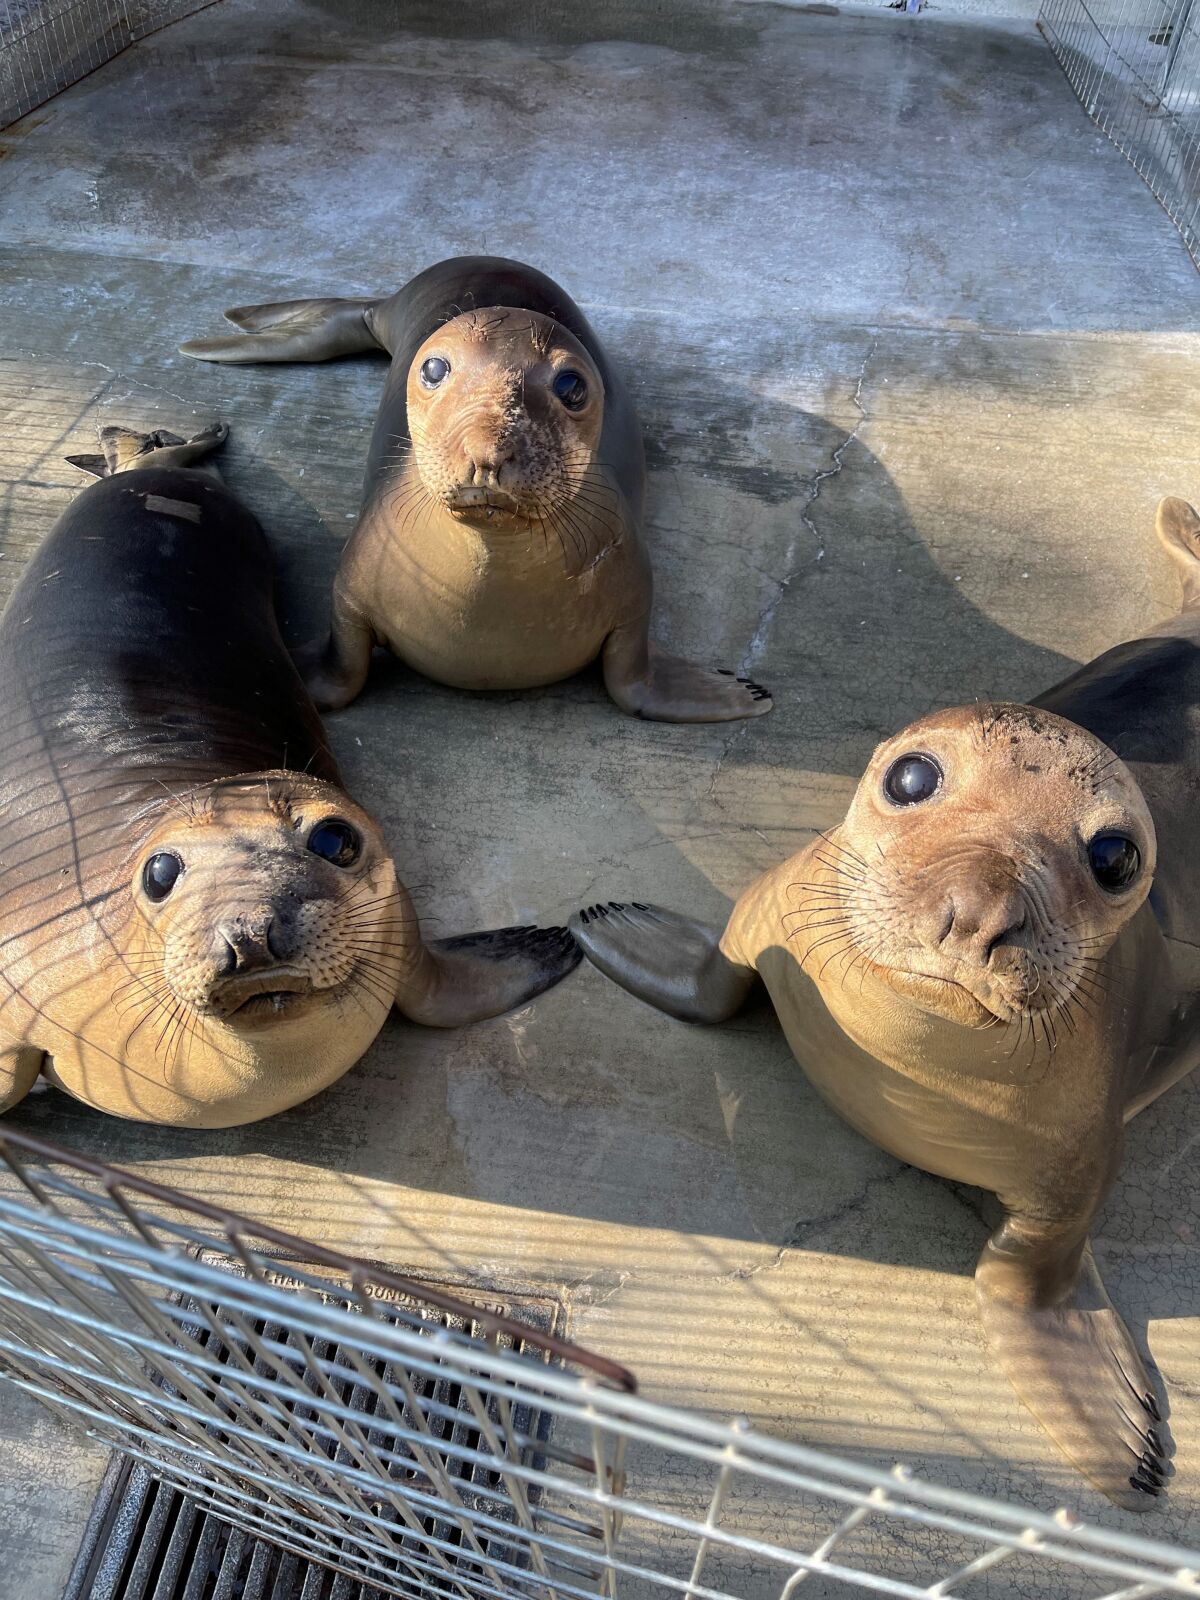 Three elephant seal patients ready to be released back into the wild.